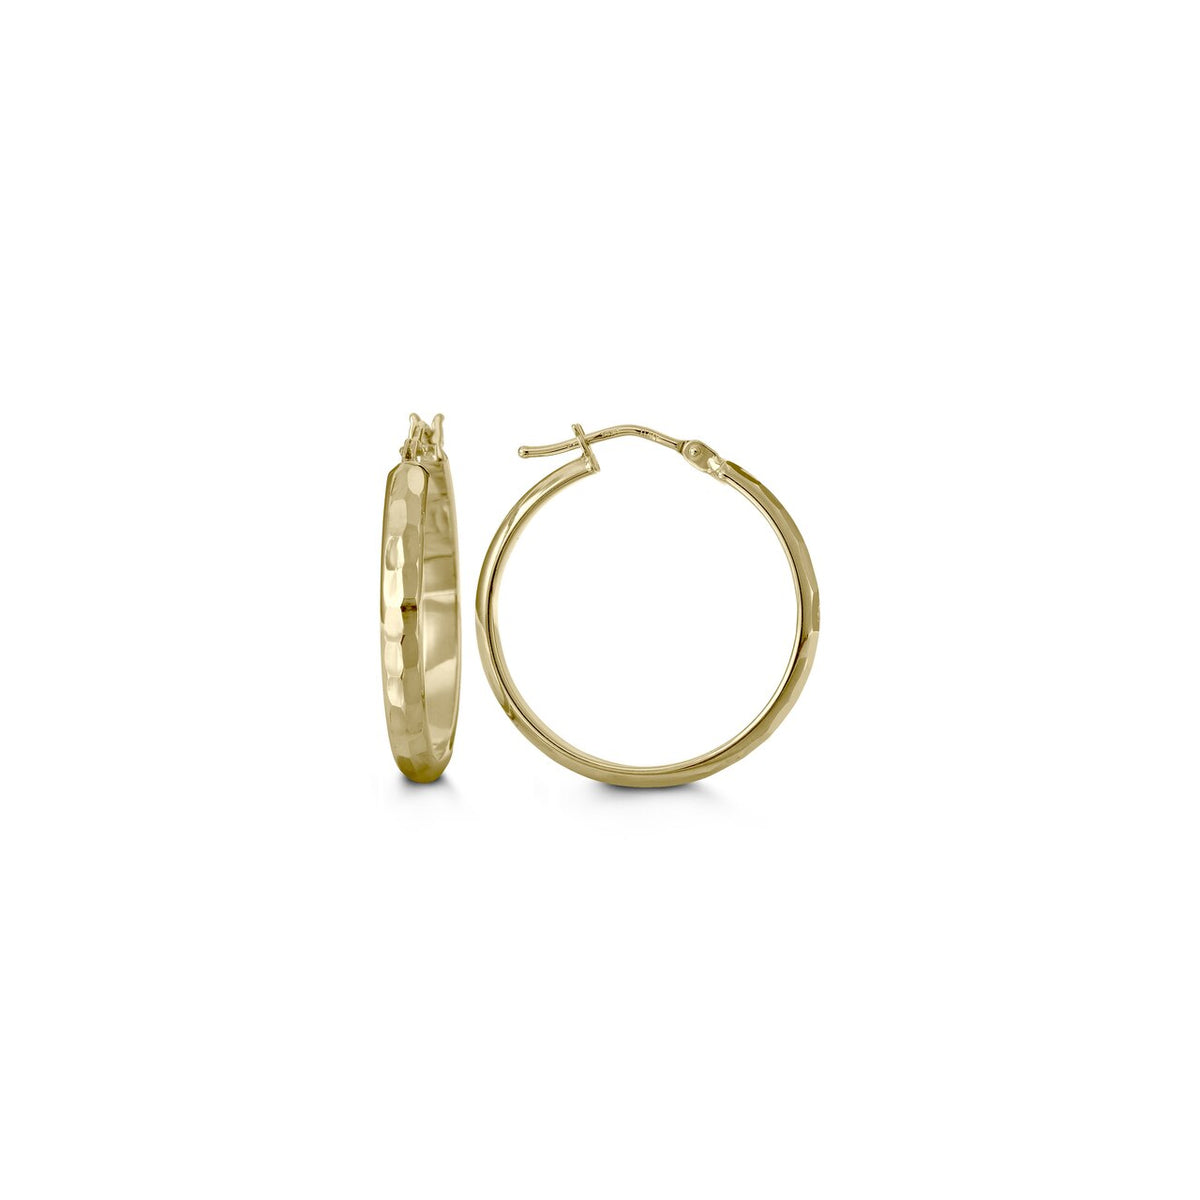 10K Yellow Gold 25mm Hammered Earrings